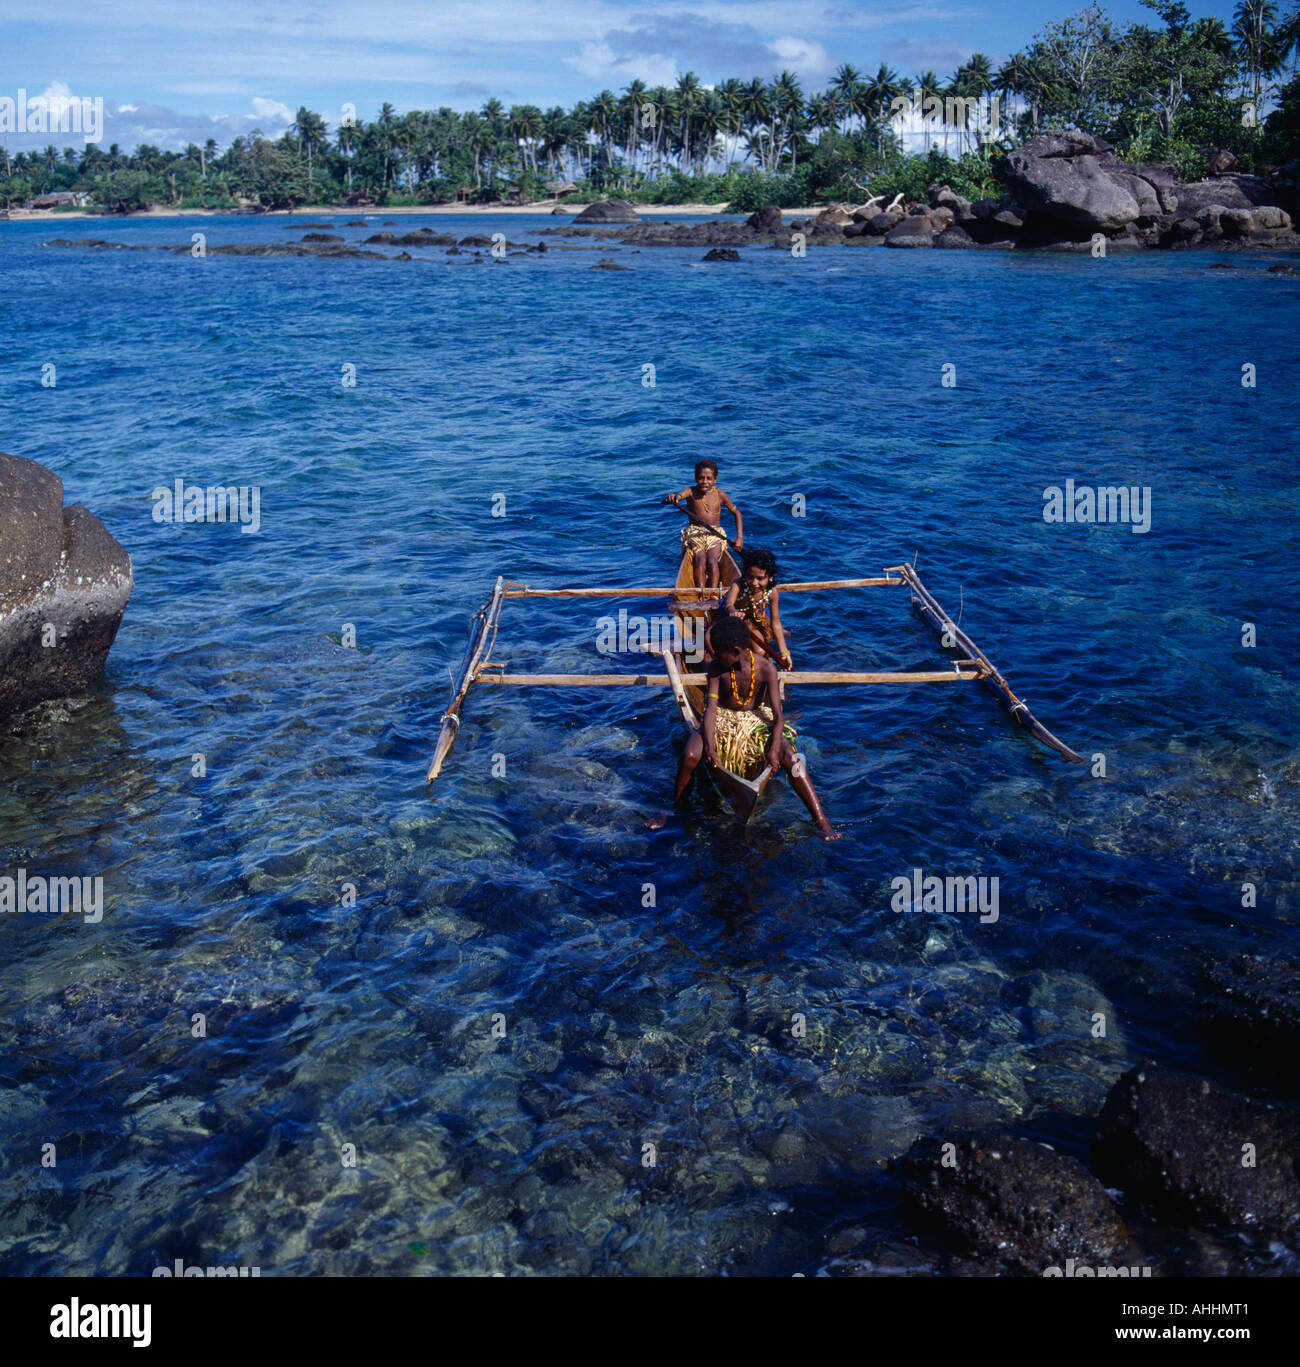 INDONESIA Asia Irian Jaya Sorong Children in outrigger canoe on clear blue water among rocks close to coconut tree lined shore. Stock Photo